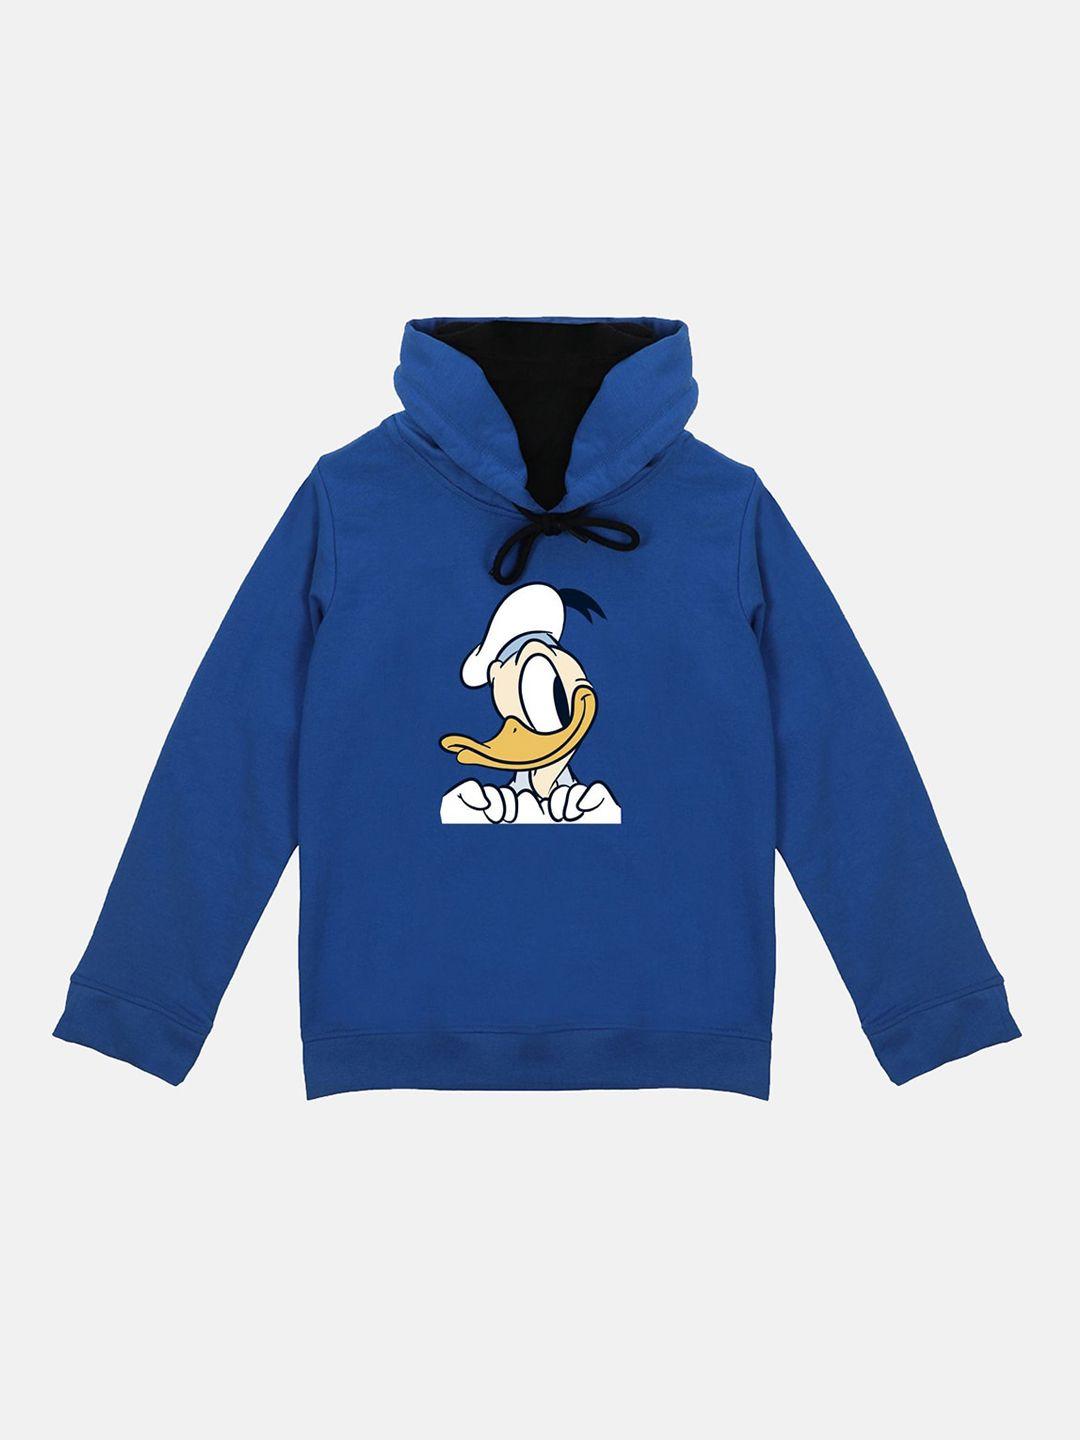 disney by wear your mind kids blue & white donald duck printed hooded sweatshirt